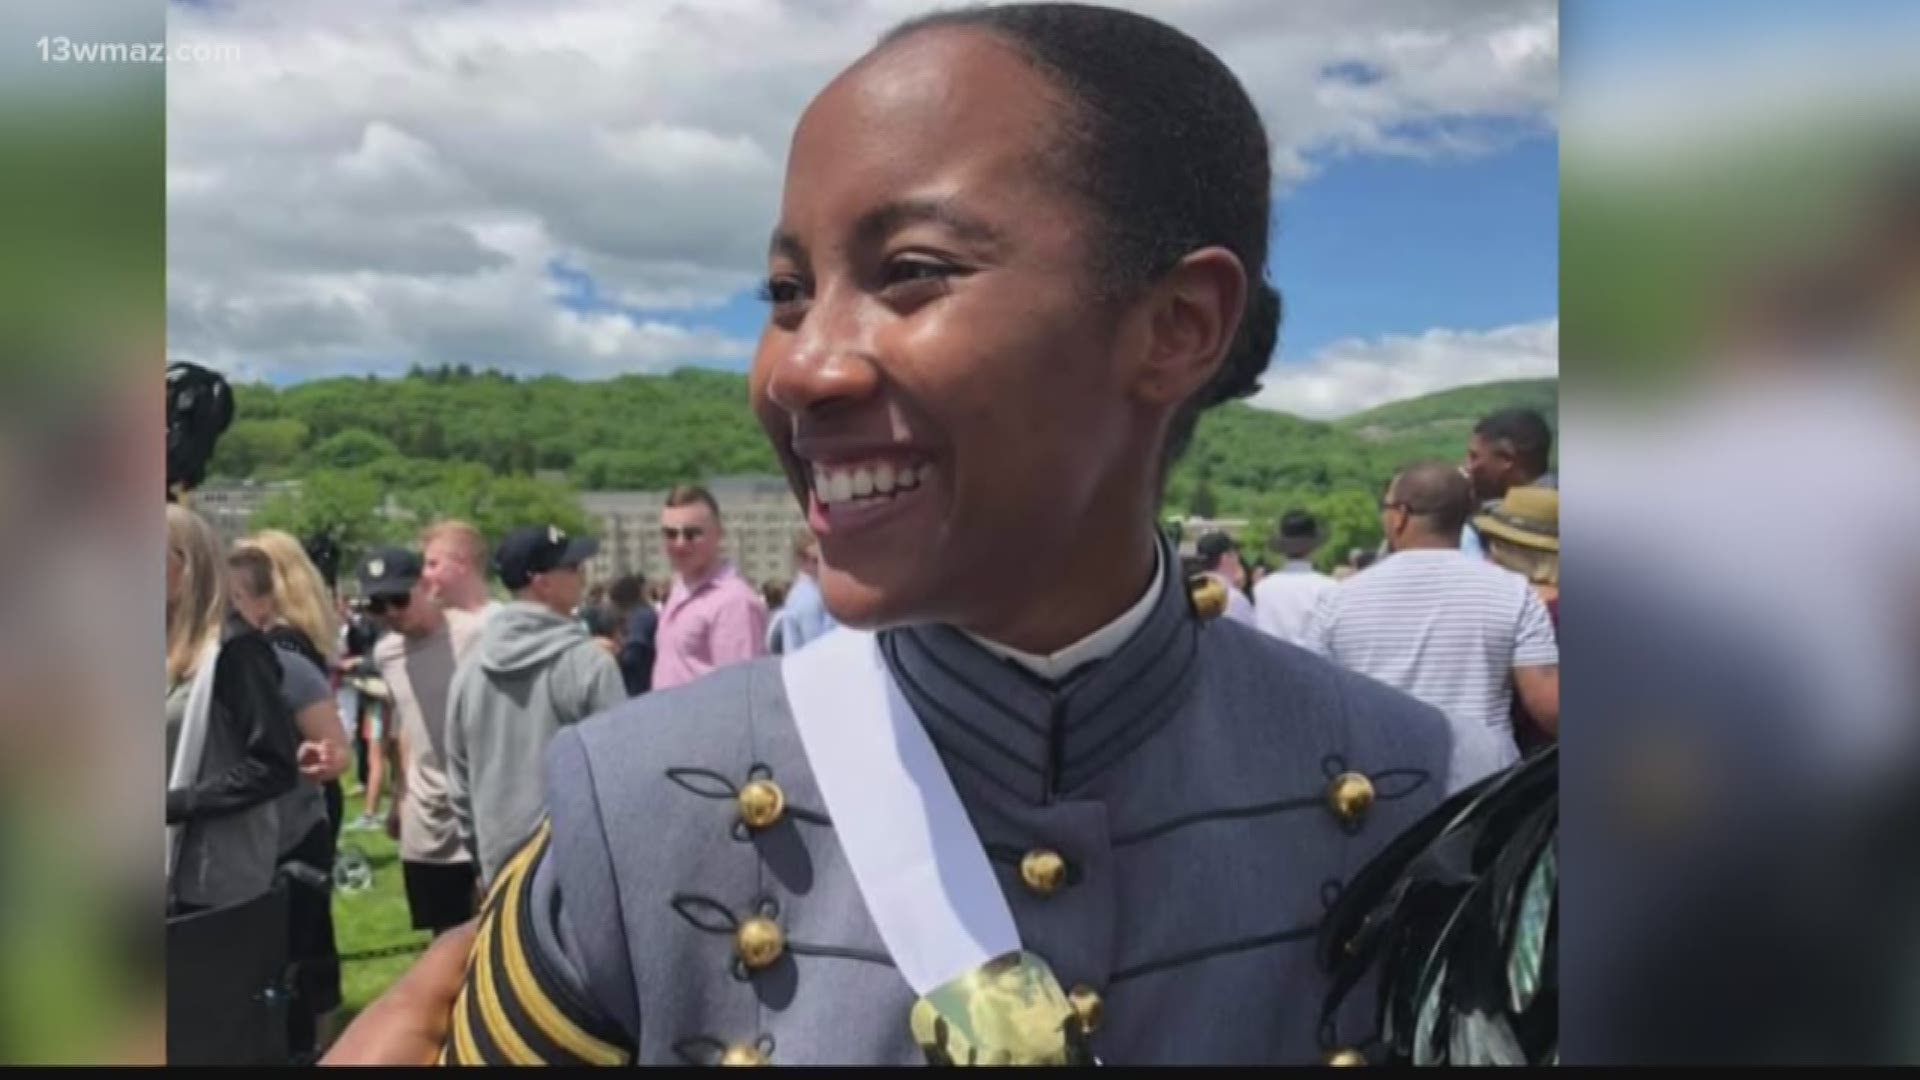 This year's graduating class of West Point Cadets made history as the military academy's most diverse class, both by race and by gender. A photo snapped days before West Point Academy's graduation gained national attention, and one of Central Georgia's own was there.